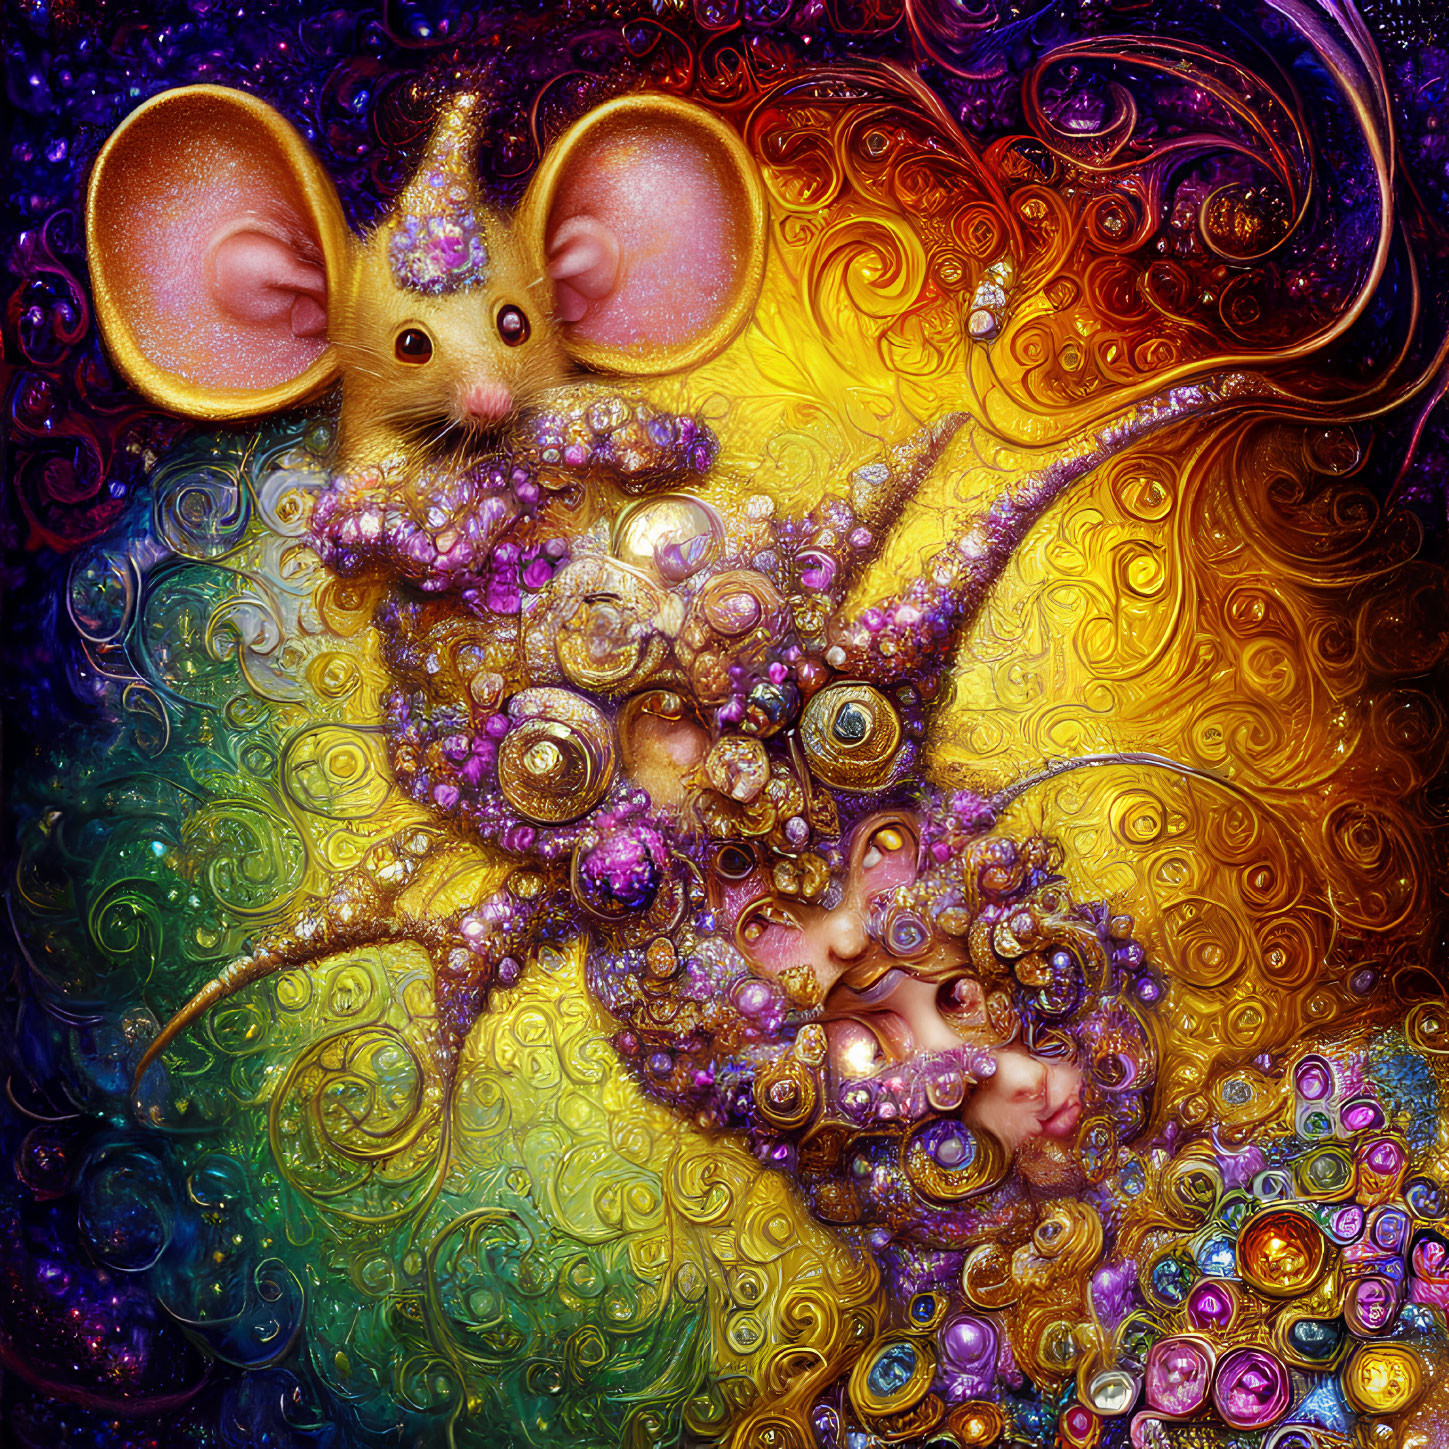 Colorful Illustration: Whimsical Mouse with Large Ears in Sparkling Setting